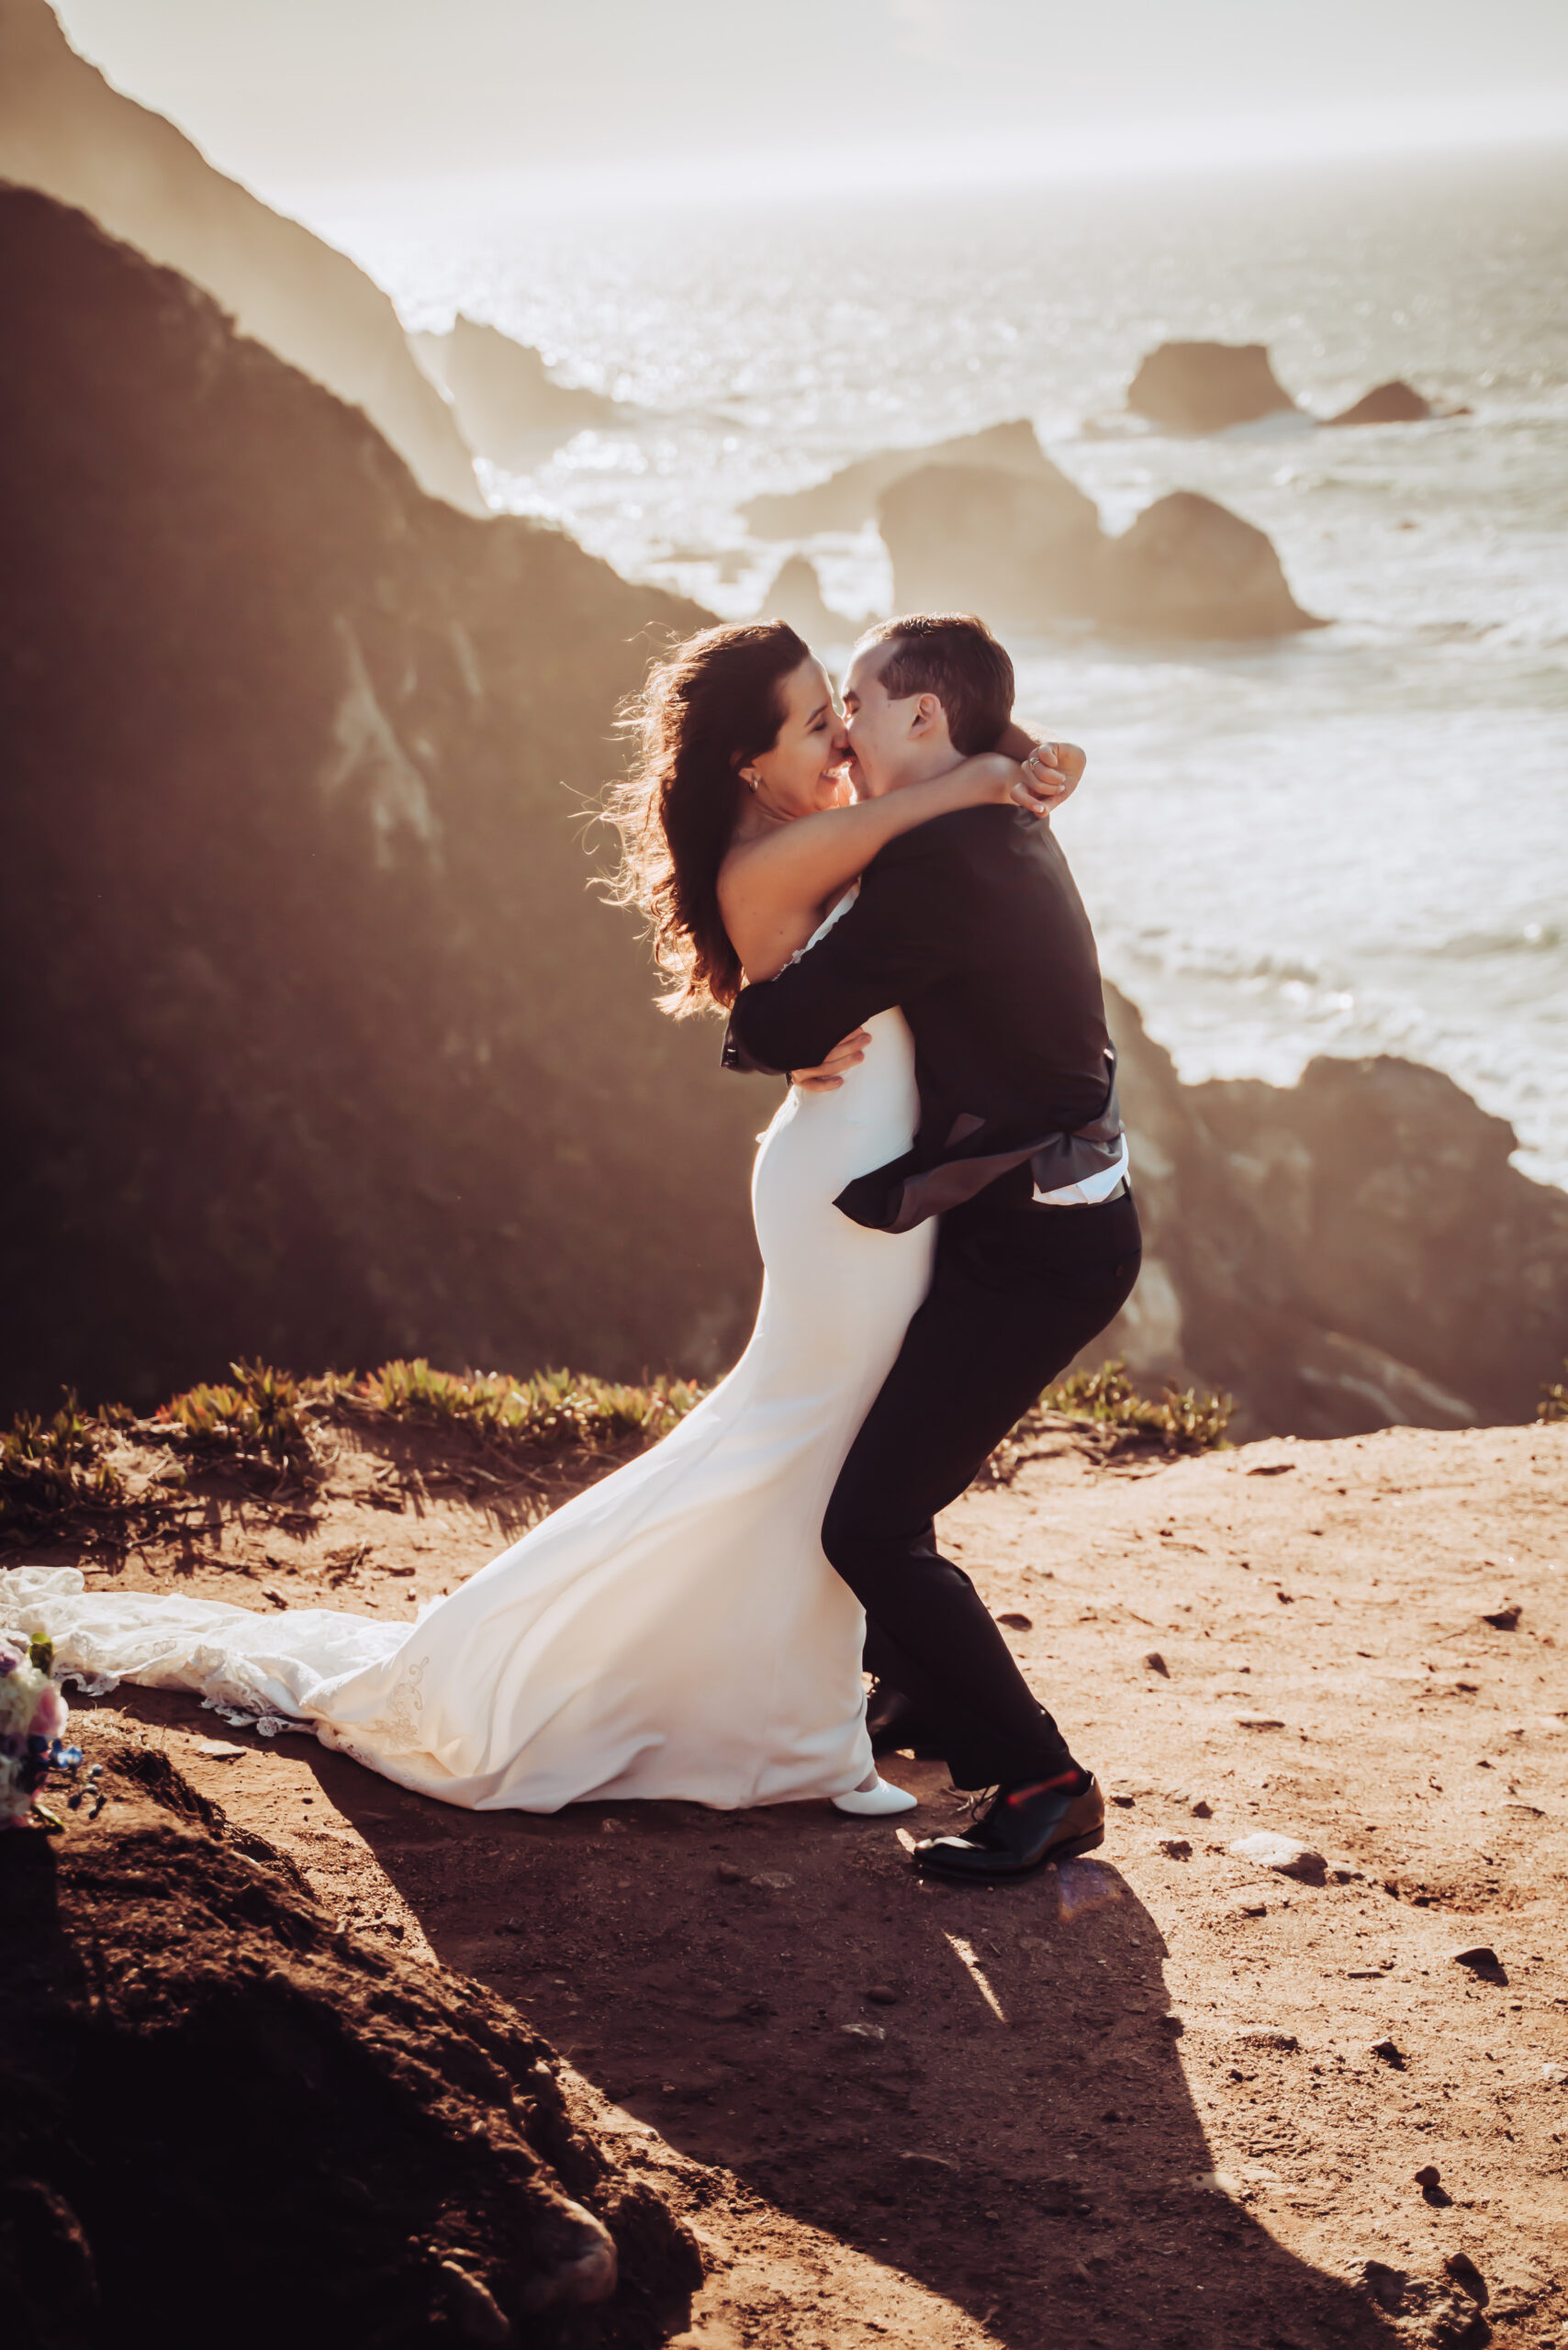 A groom holding his bride overlooking the cliffs and sunset of Big Sur on their Elopement day